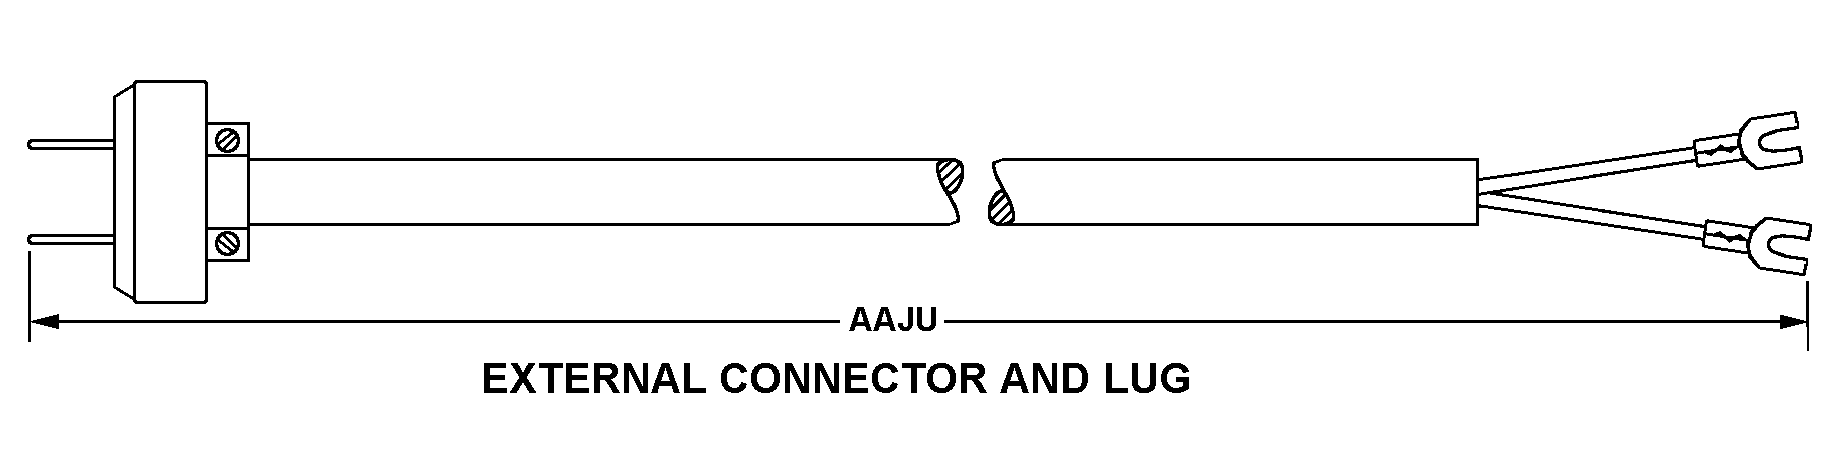 EXTERNAL CONNECTOR AND LUG style nsn 5995-00-521-7838